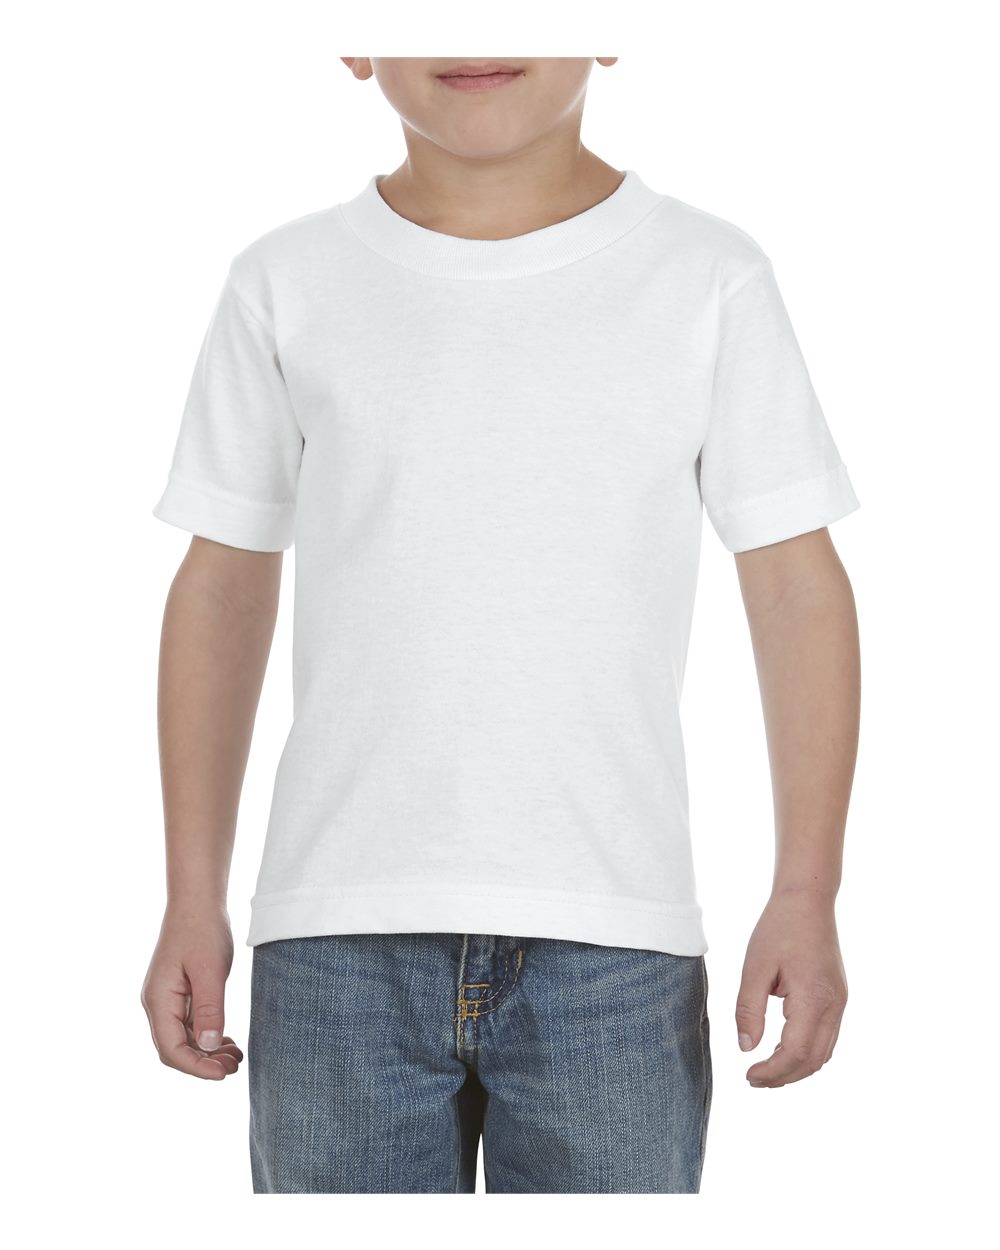 Alstyle 3380 - Classic Toddler Tee